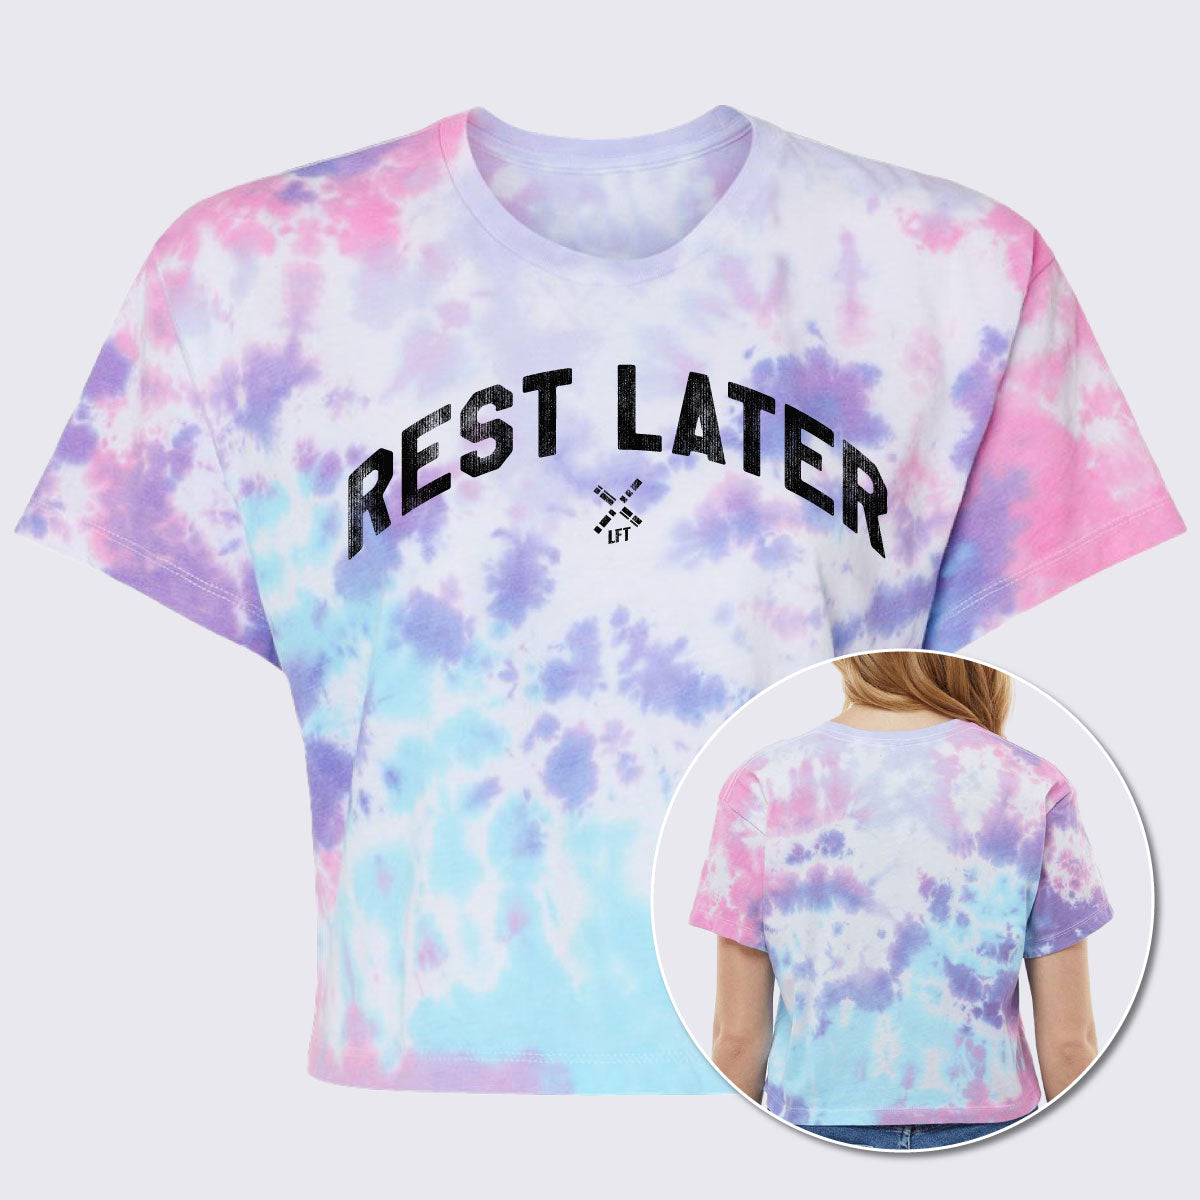 Rest Later Women’s Tie-Dyed Crop T-Shirt